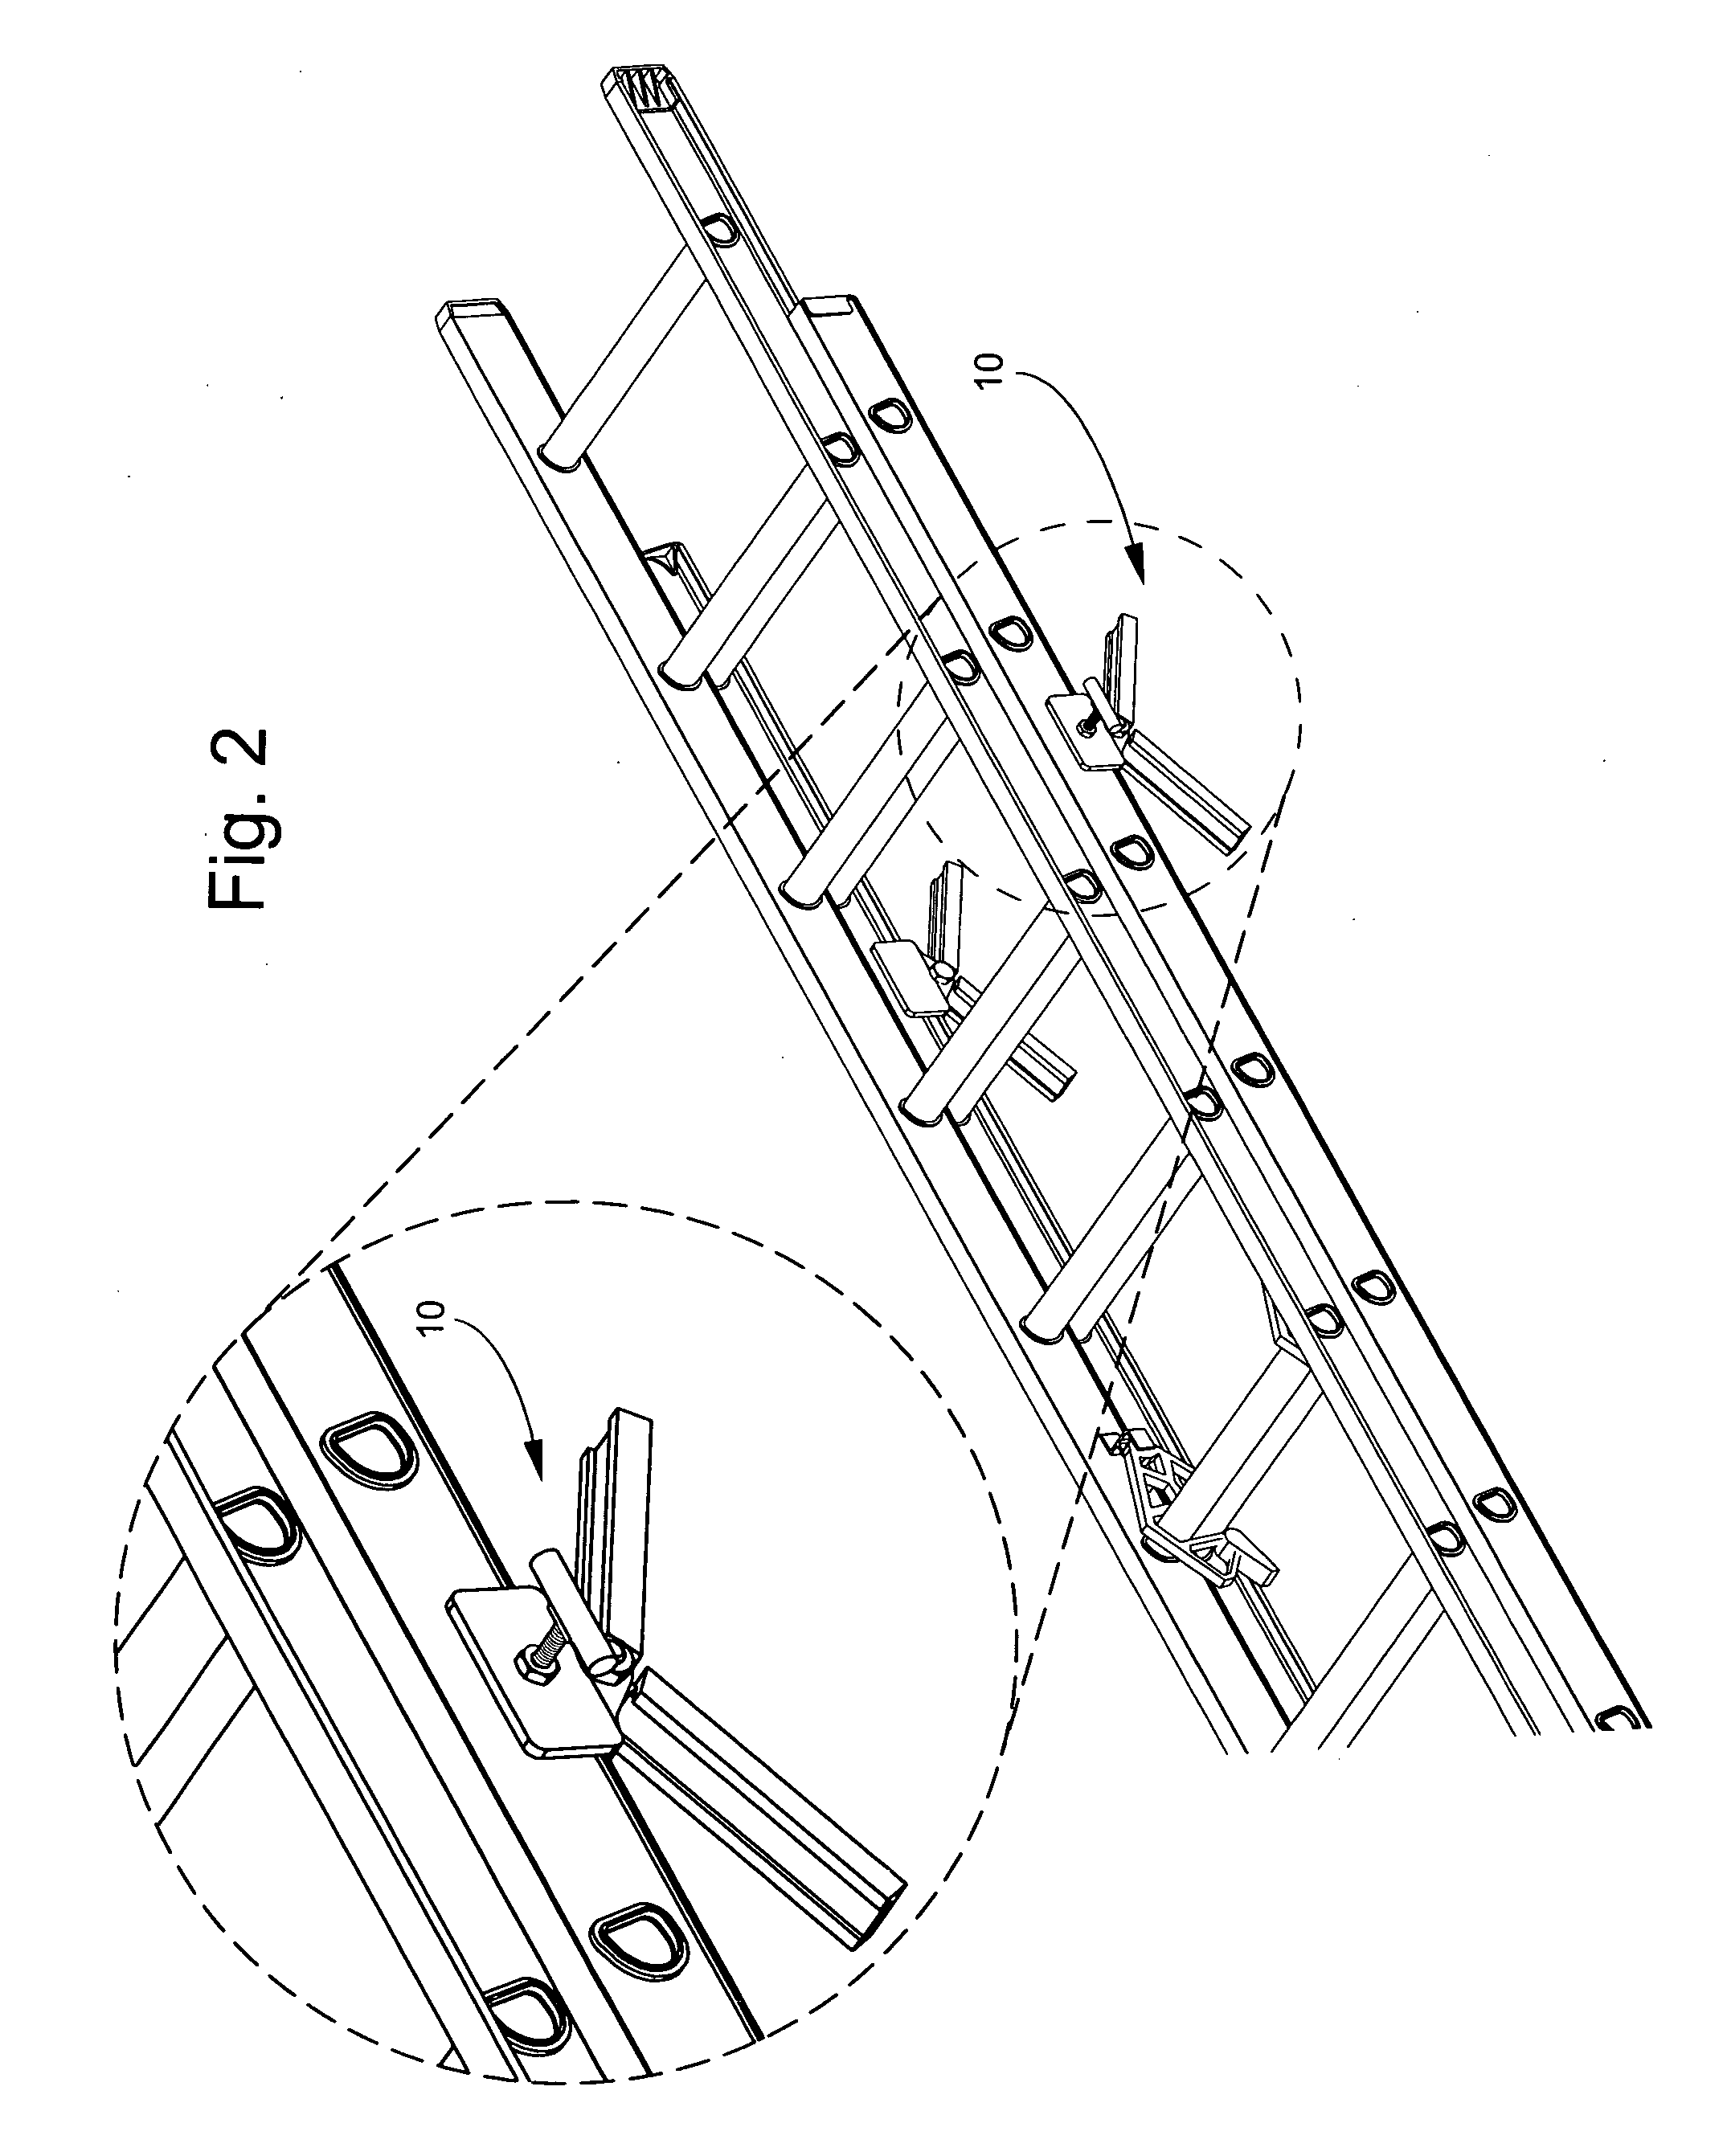 Device and method for transporting elongate objects using pick-up truck